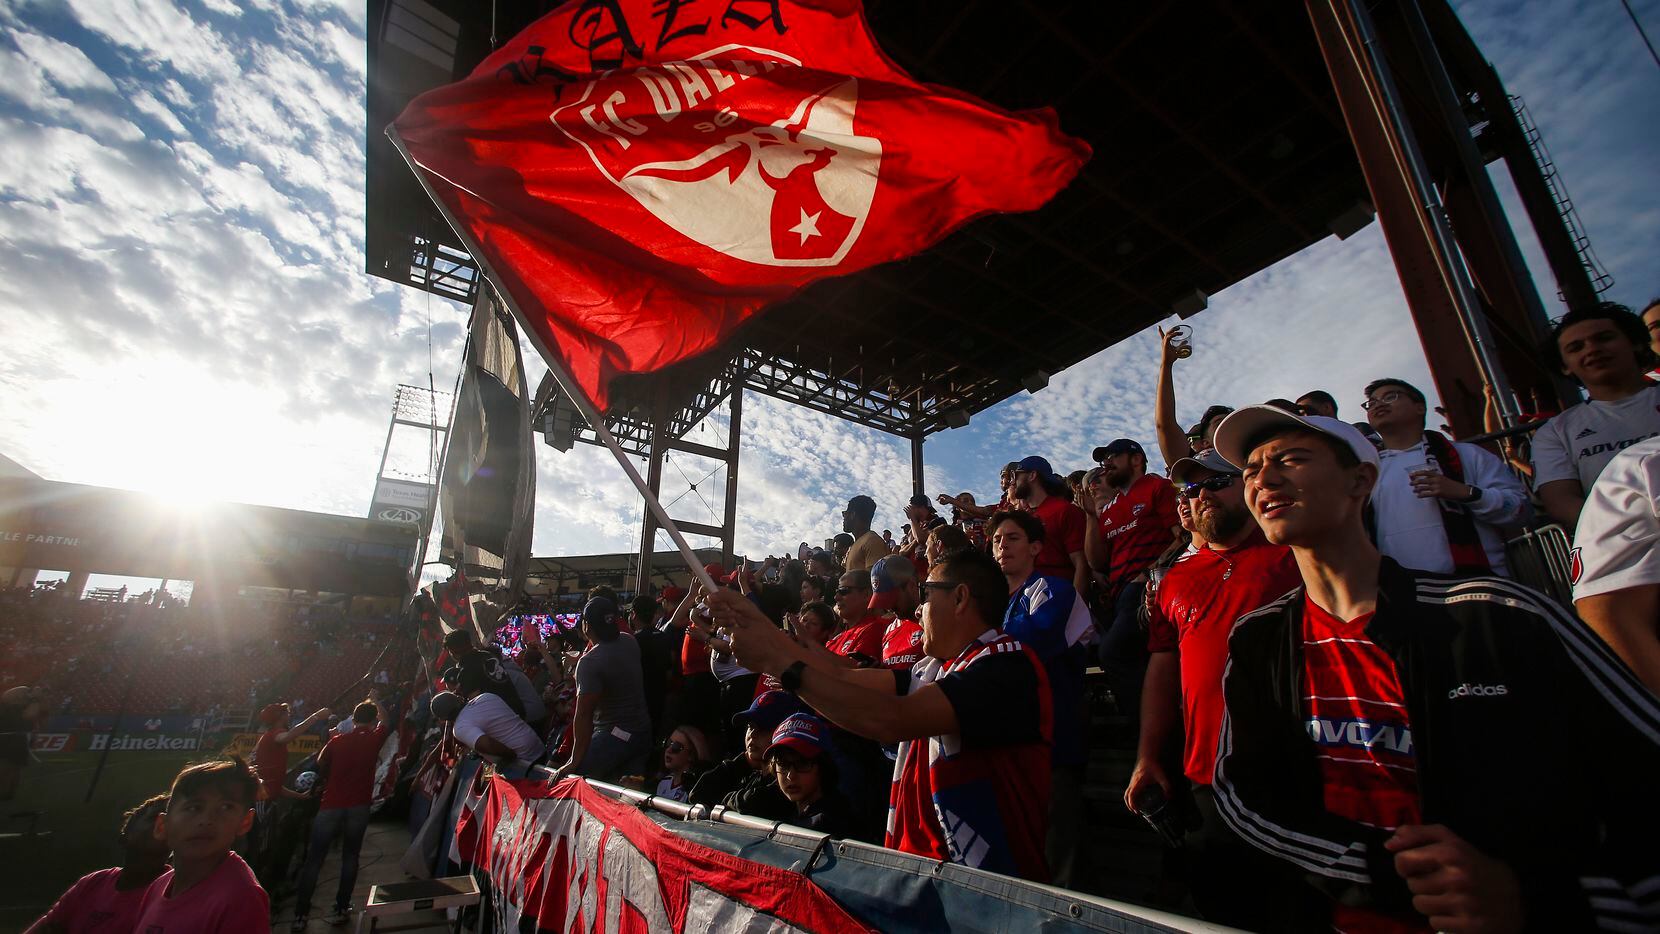 FC Dallas fans celebrate at the start of an MLS soccer match against Philadelphia Union on Saturday, Feb. 29, 2020 at Toyota Stadium in Frisco, Texas.